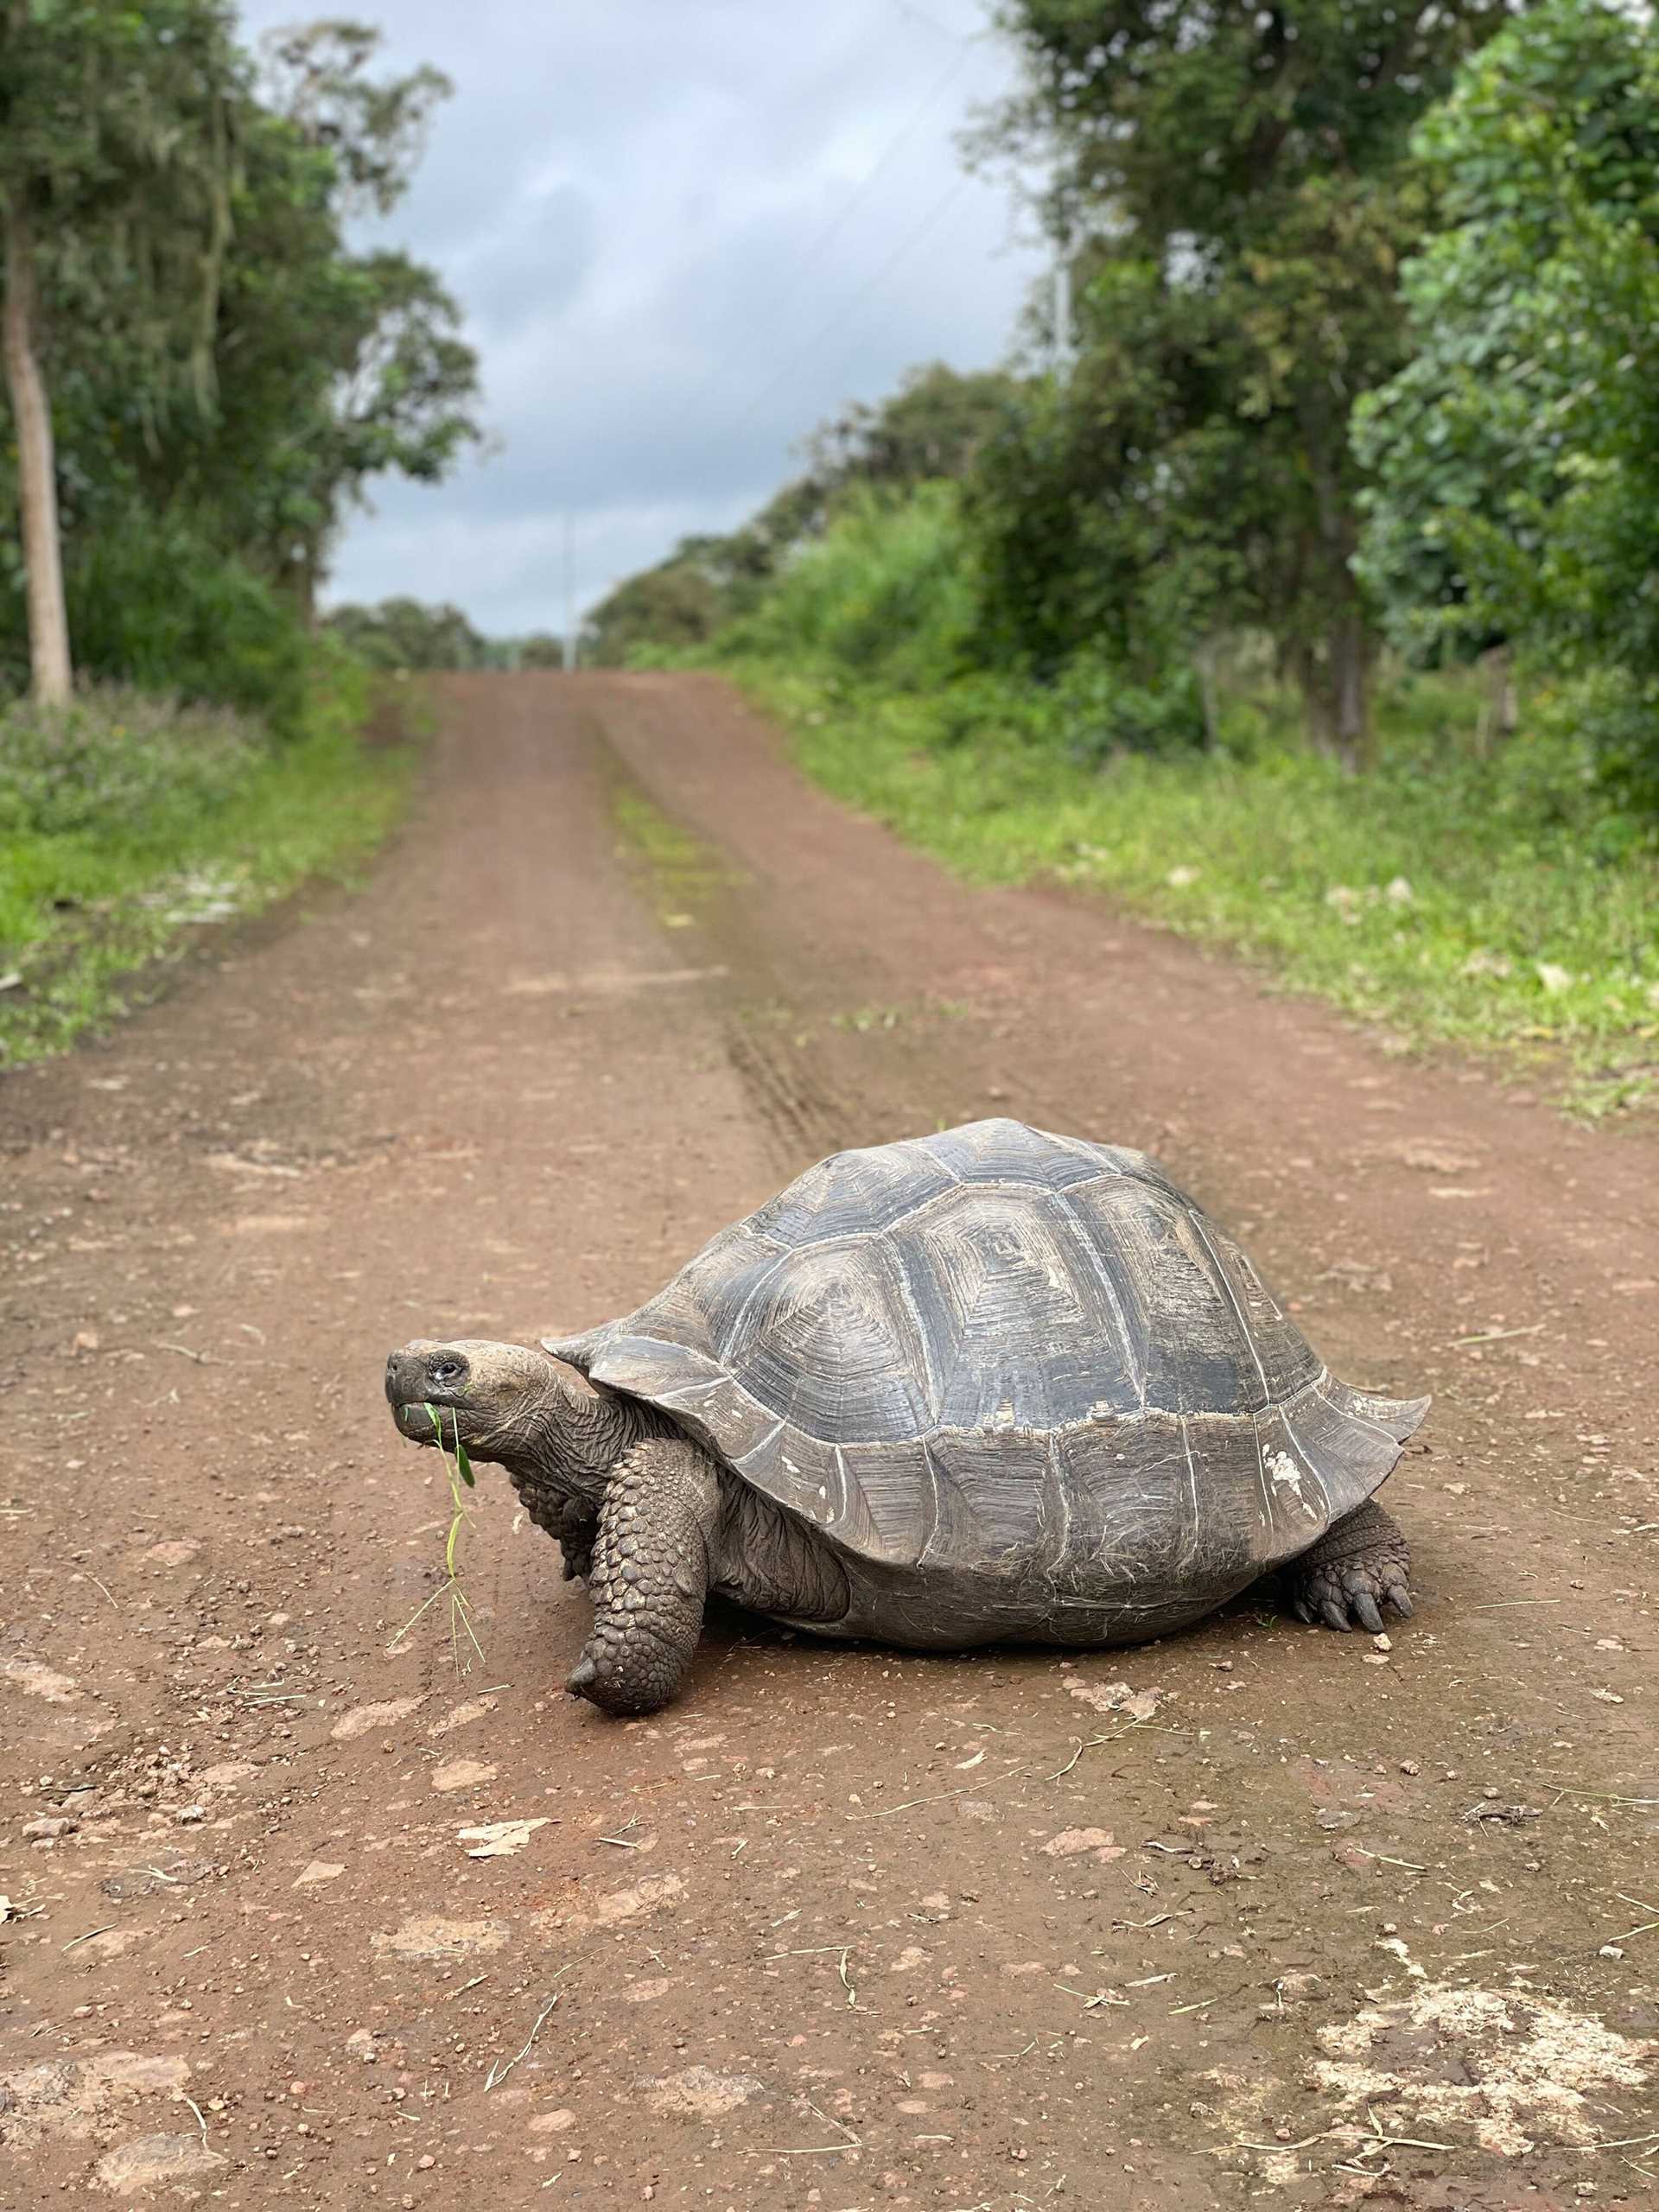 giant tortoise in the road